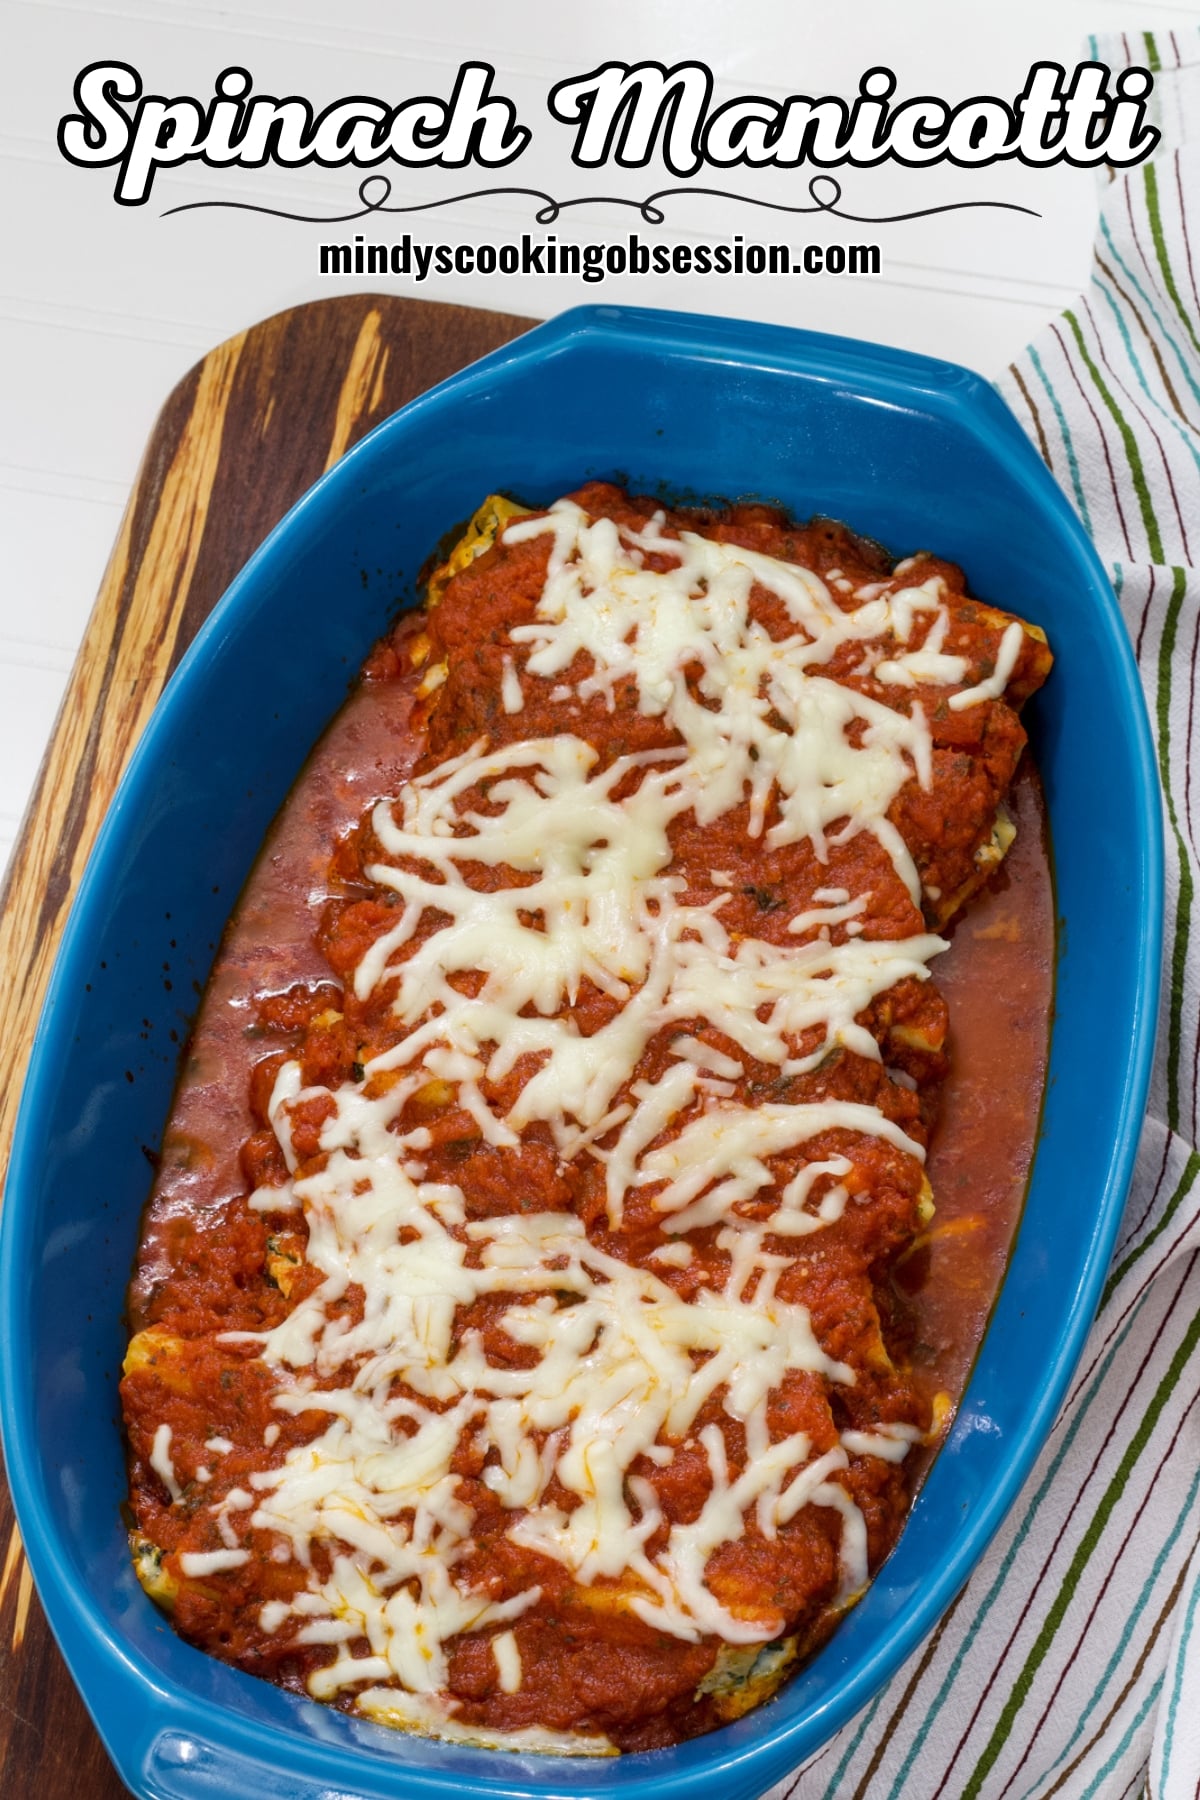 Easy Cheese & Spinach Stuffed Manicotti Recipe - creamy ricotta filling inside tube shaped pasta shells, topped with marinara sauce and then baked to perfection. The perfect meatless Monday dish the whole family is sure to love. via @mindyscookingobsession